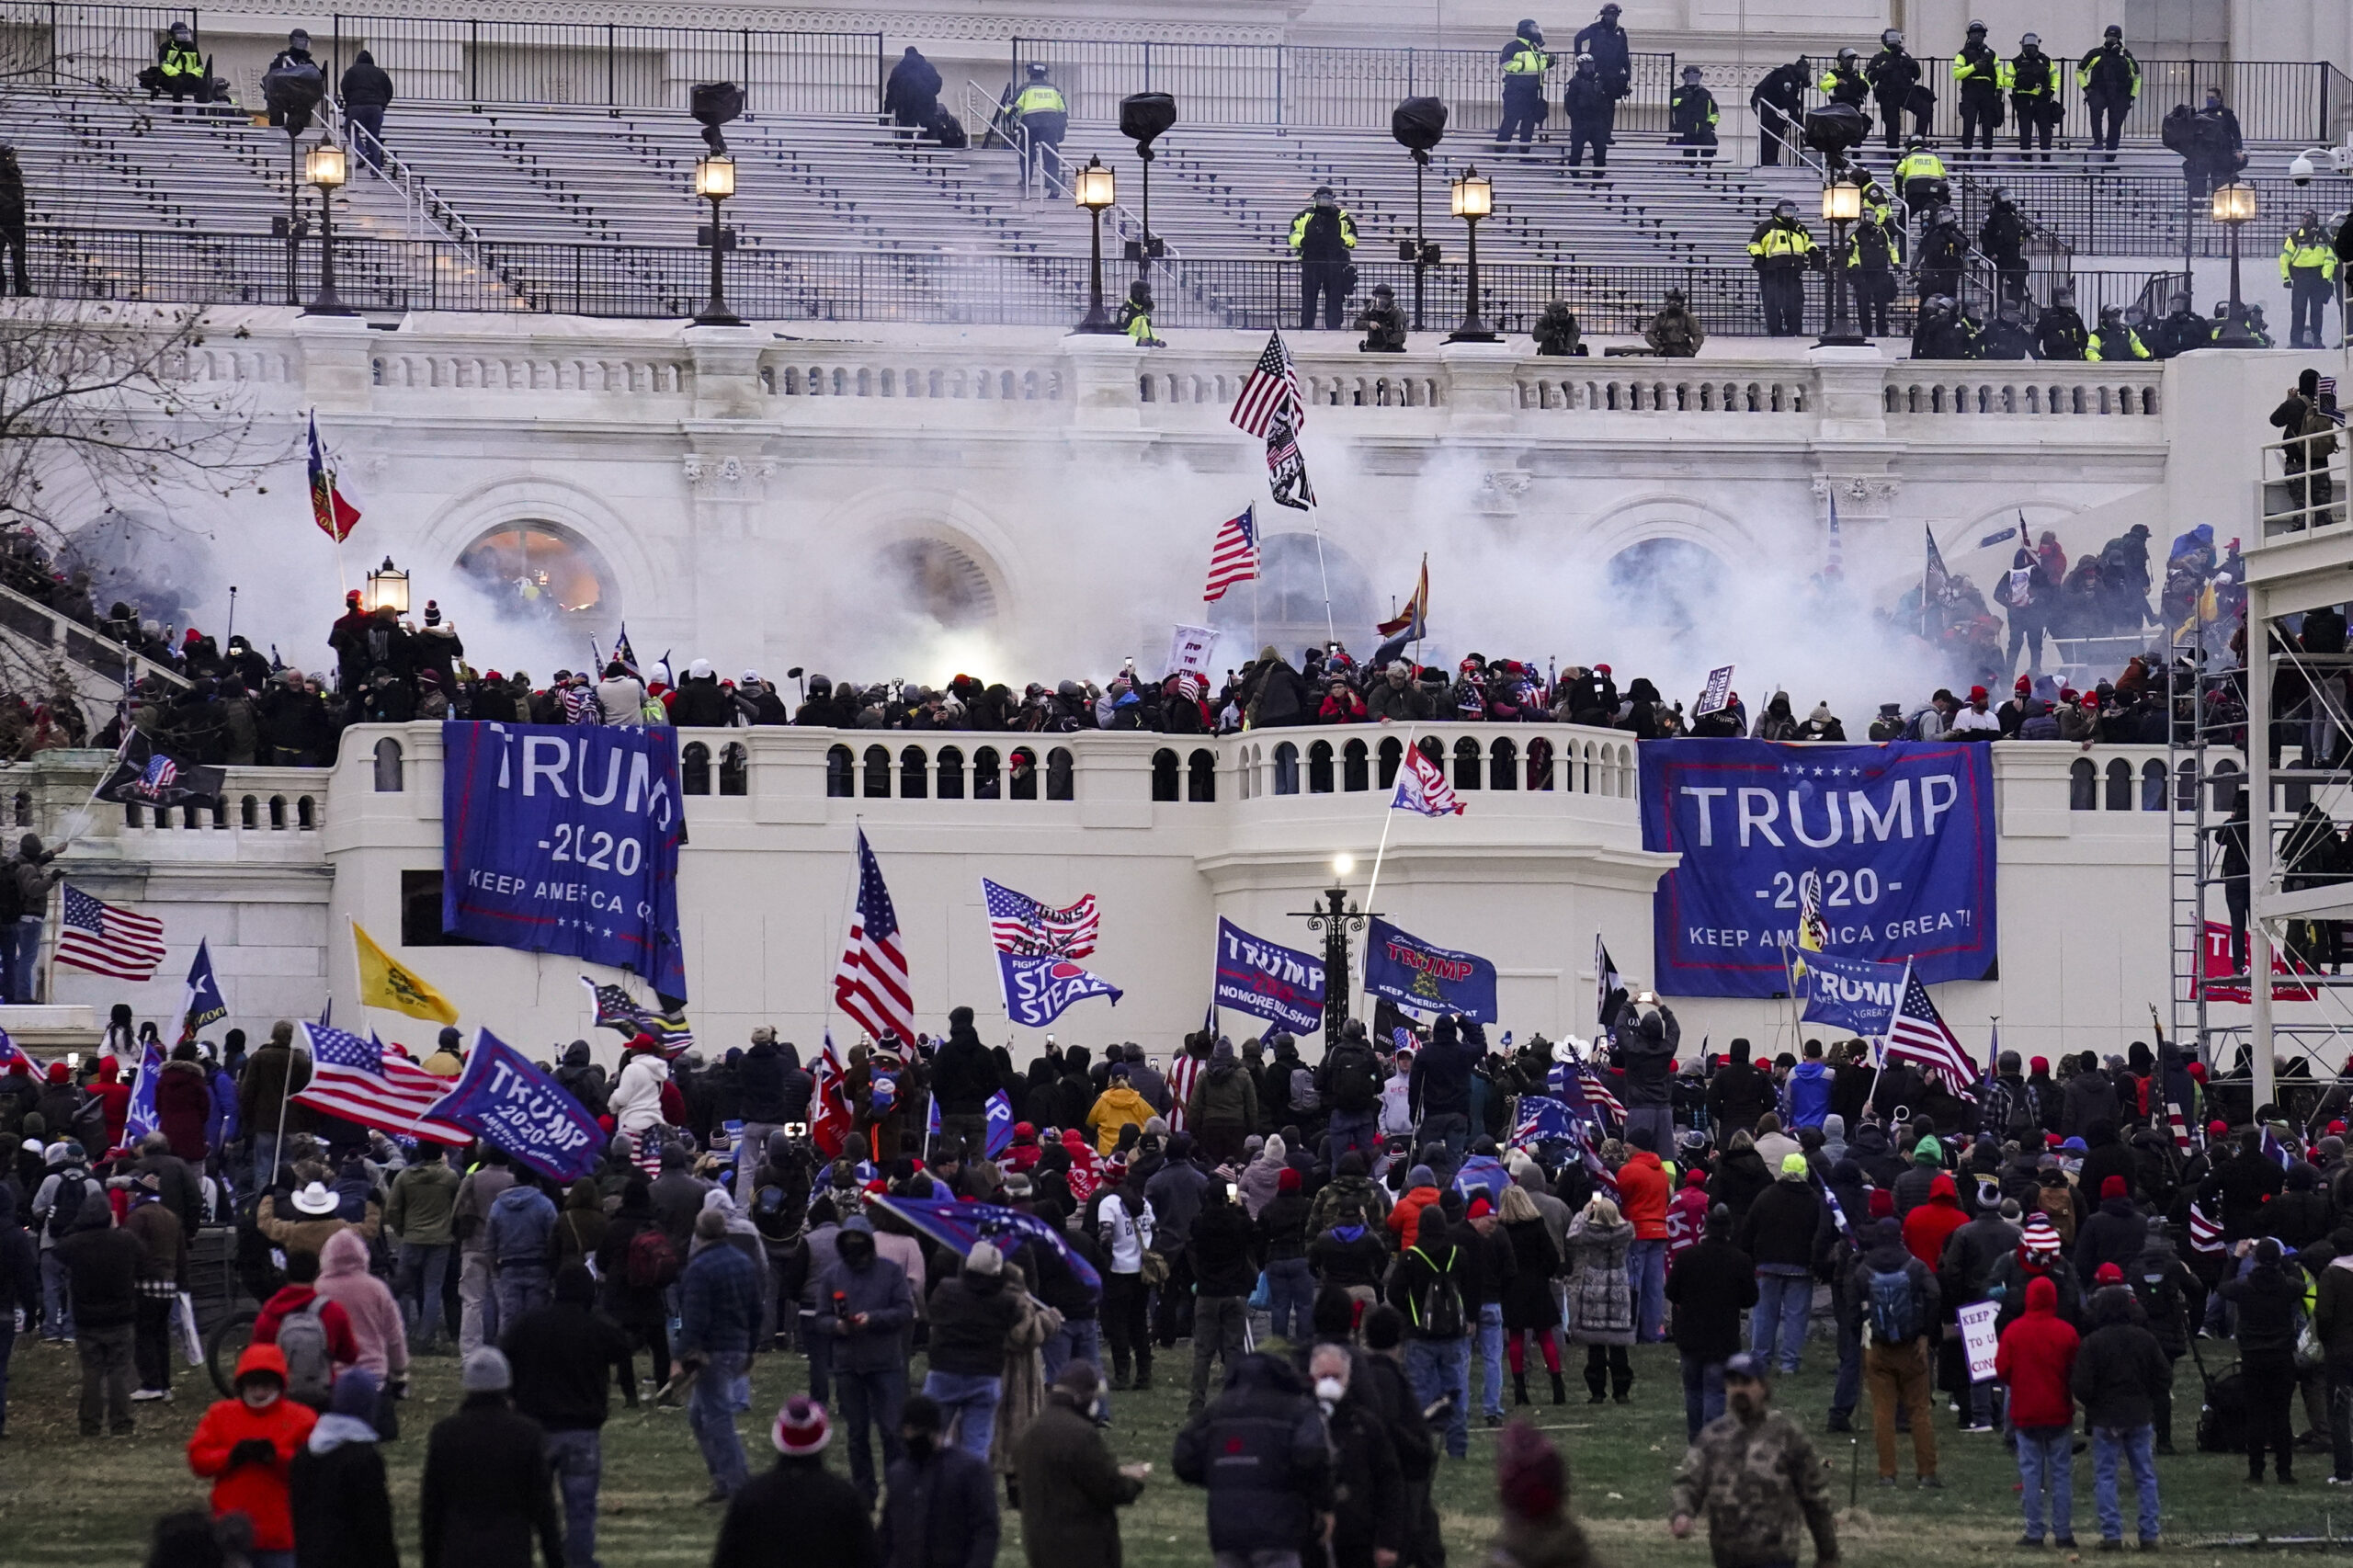 Violent protesters, loyal to President Donald Trump, storm the Capitol, Wednesday, Jan. 6, 2021, in Washington. It's been a stunning day as a number of lawmakers and then the mob of protesters tried to overturn America's presidential election, undercut the nation's democracy and keep Democrat Joe Biden from replacing Trump in the White House. (AP Photo/John Minchillo)